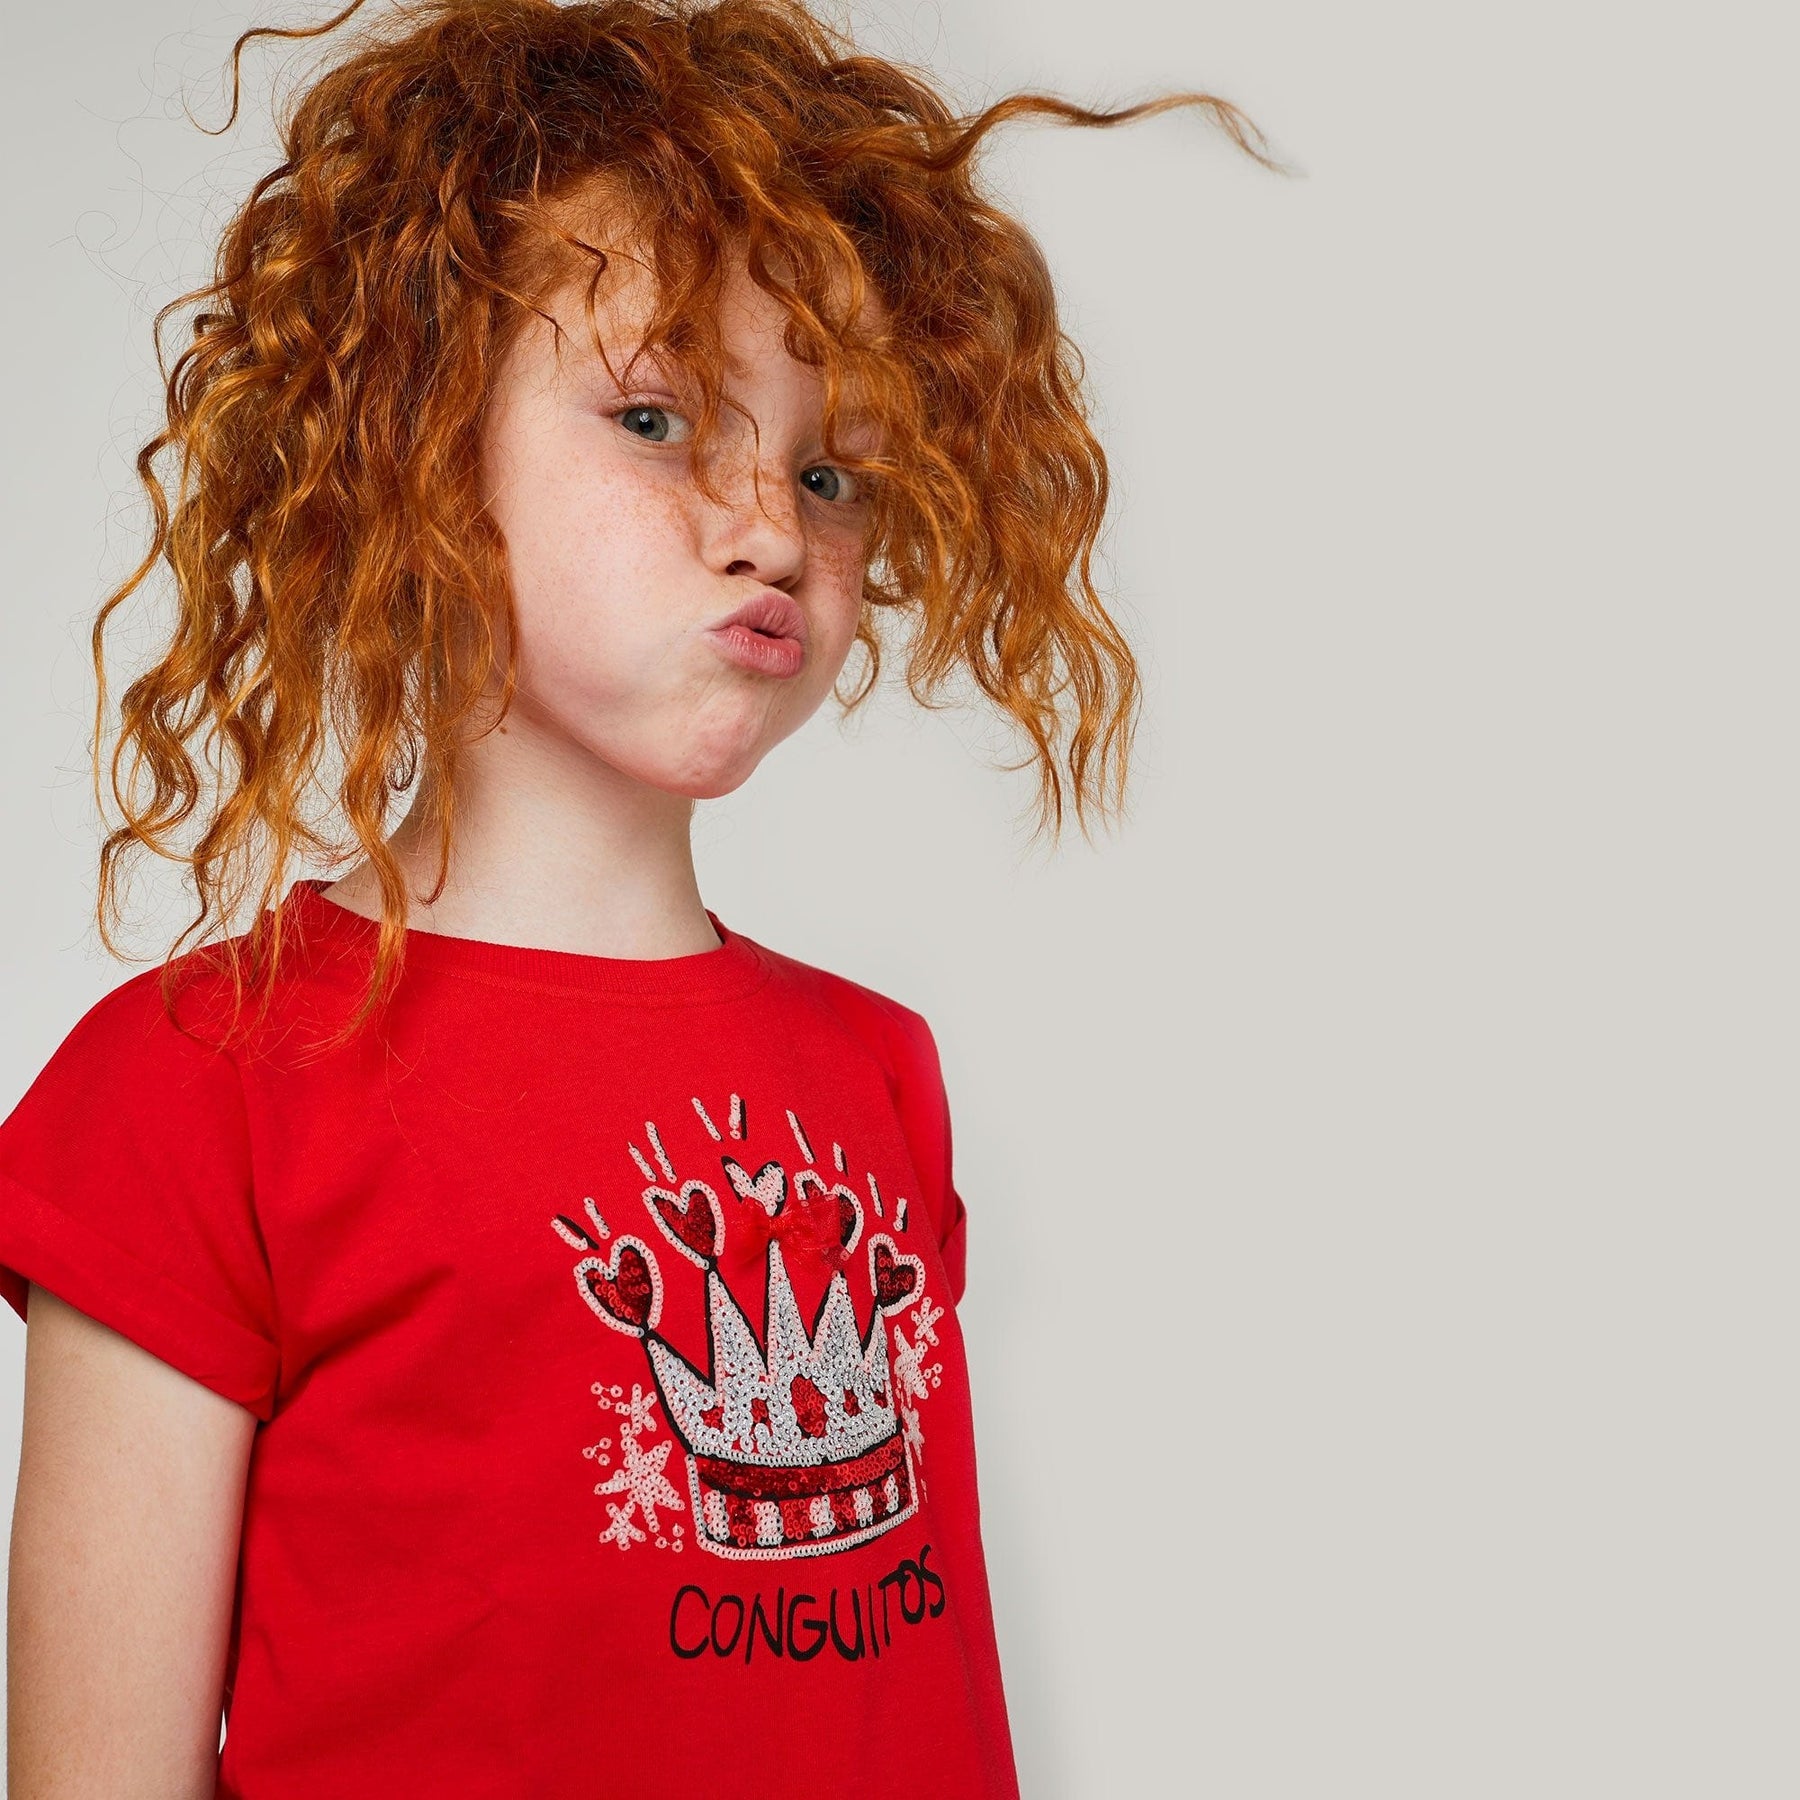 CONGUITOS TEXTIL Clothing Girls "Crown" Glitter Glow in the Dark Red T-Shirt